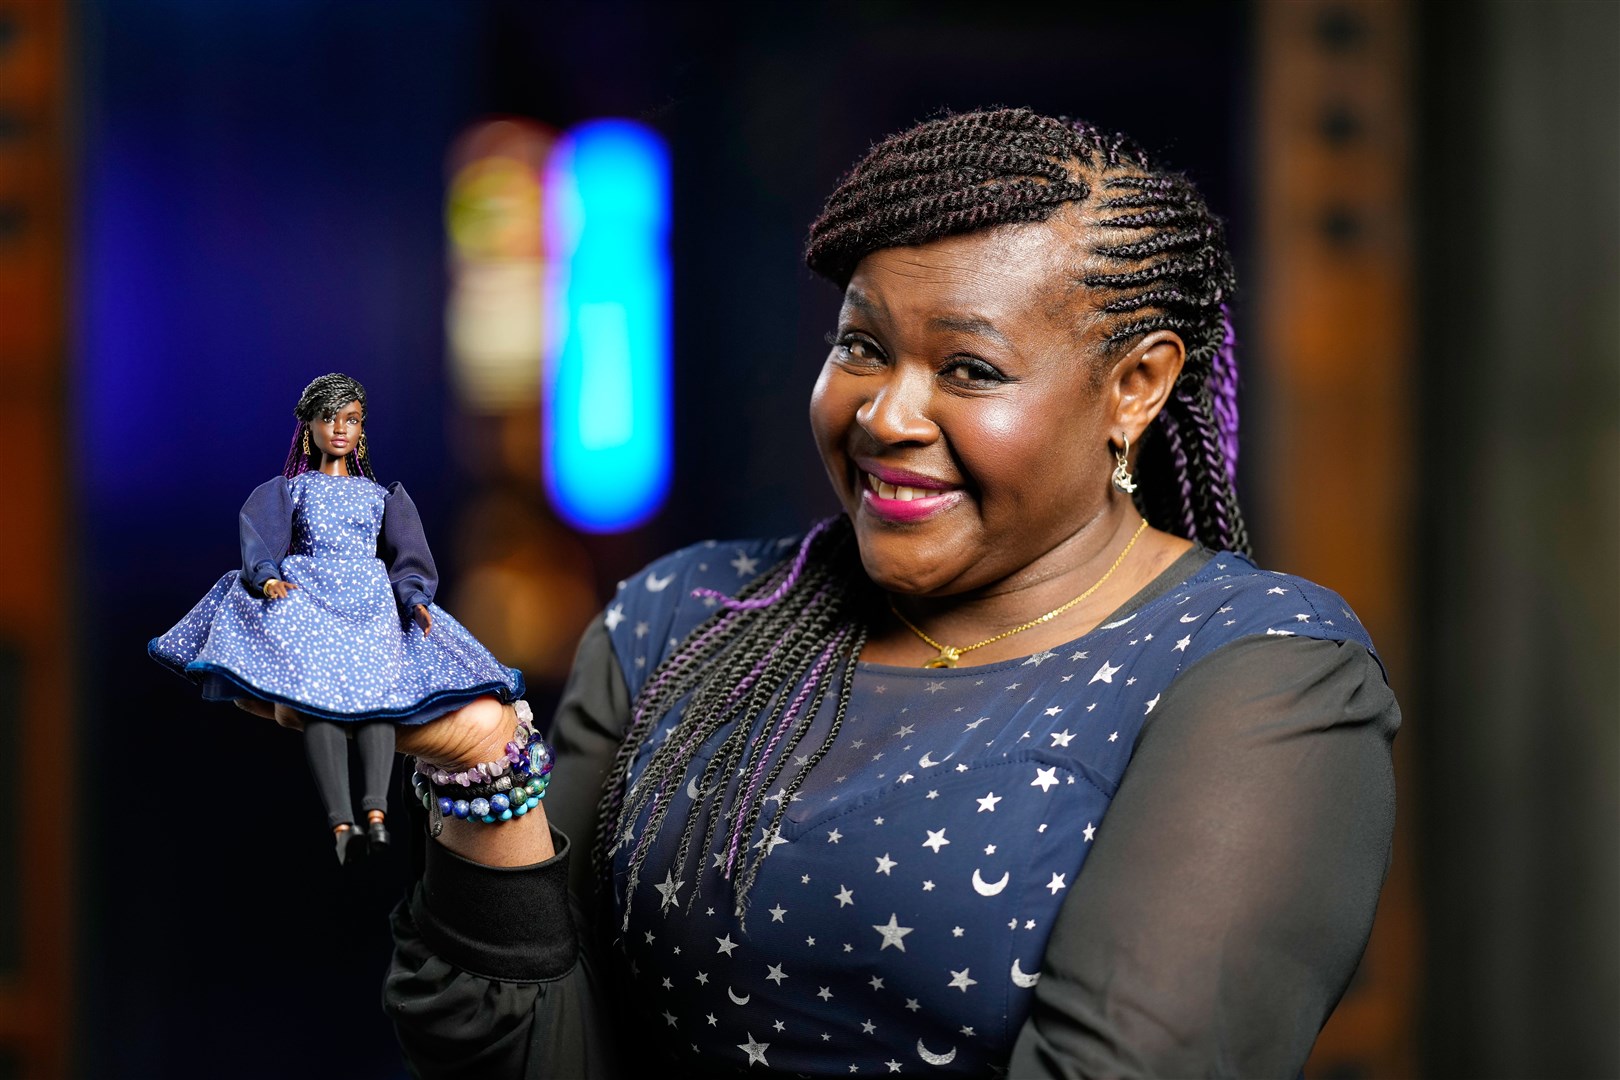 Dr Maggie Aderin-Pocock said she and her daughter ‘danced around the living room’ when they heard she was being honoured with a Barbie doll (Mattel/PA)